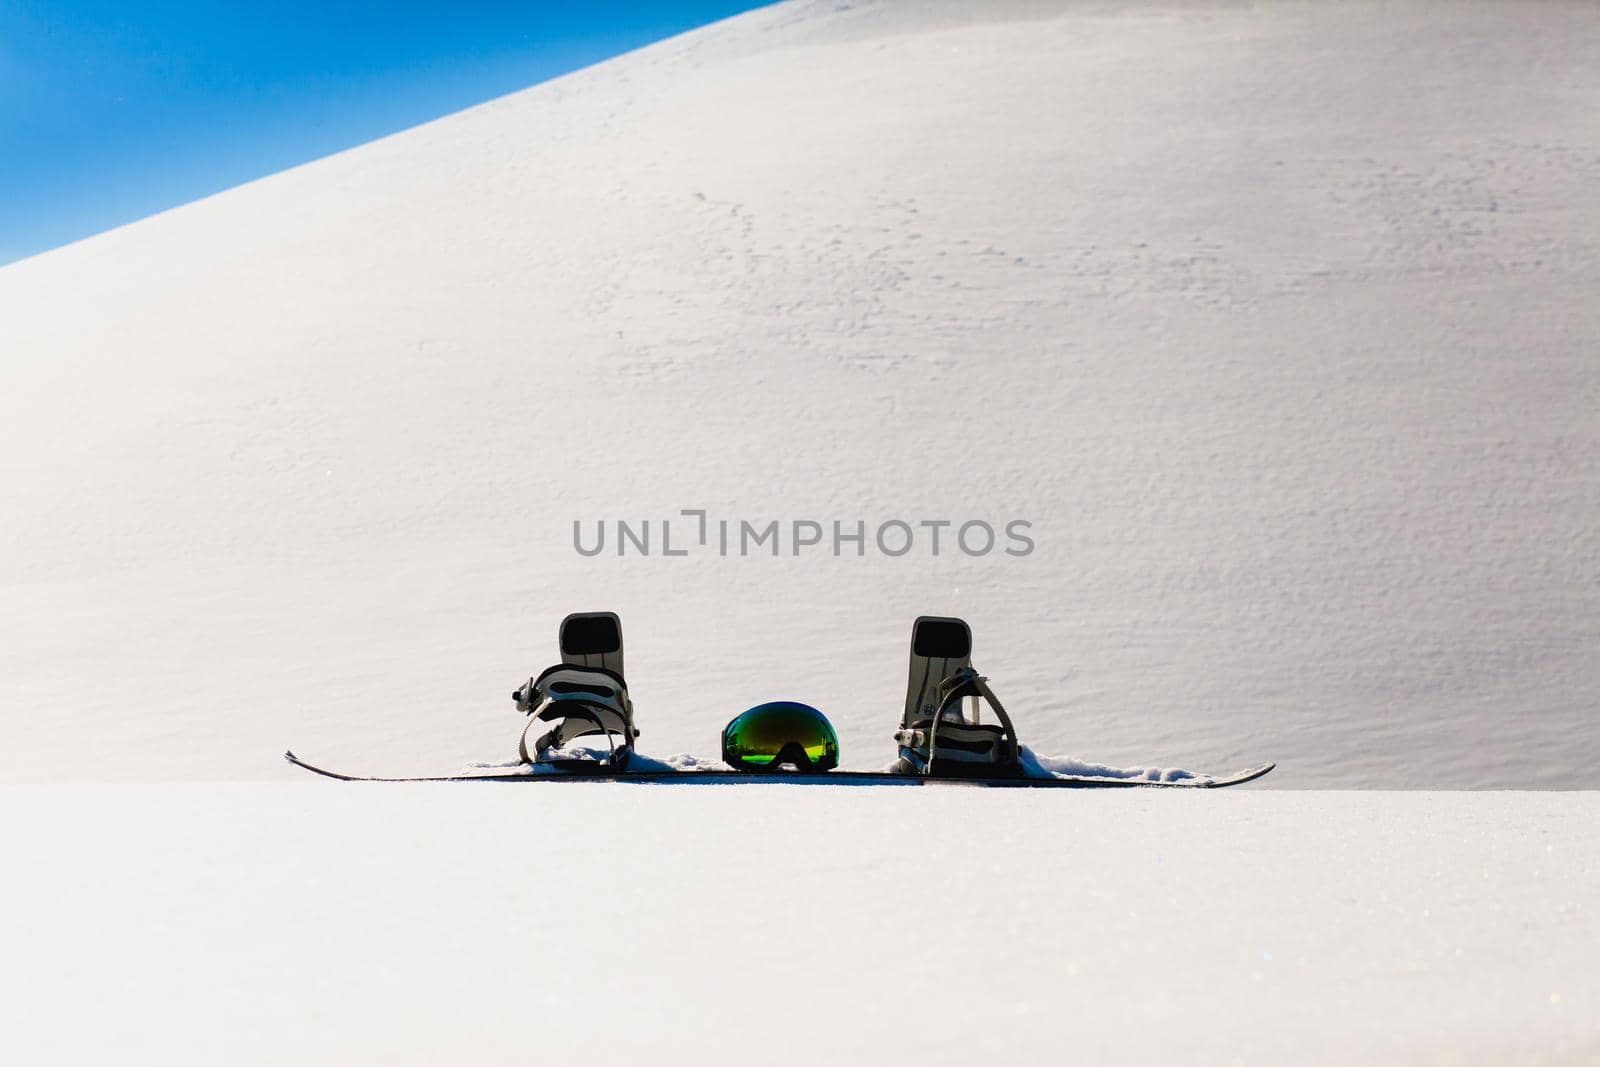 Snowboard and ski googles laying on a snow near the freeride slope by Gennadii_Chebeliaev